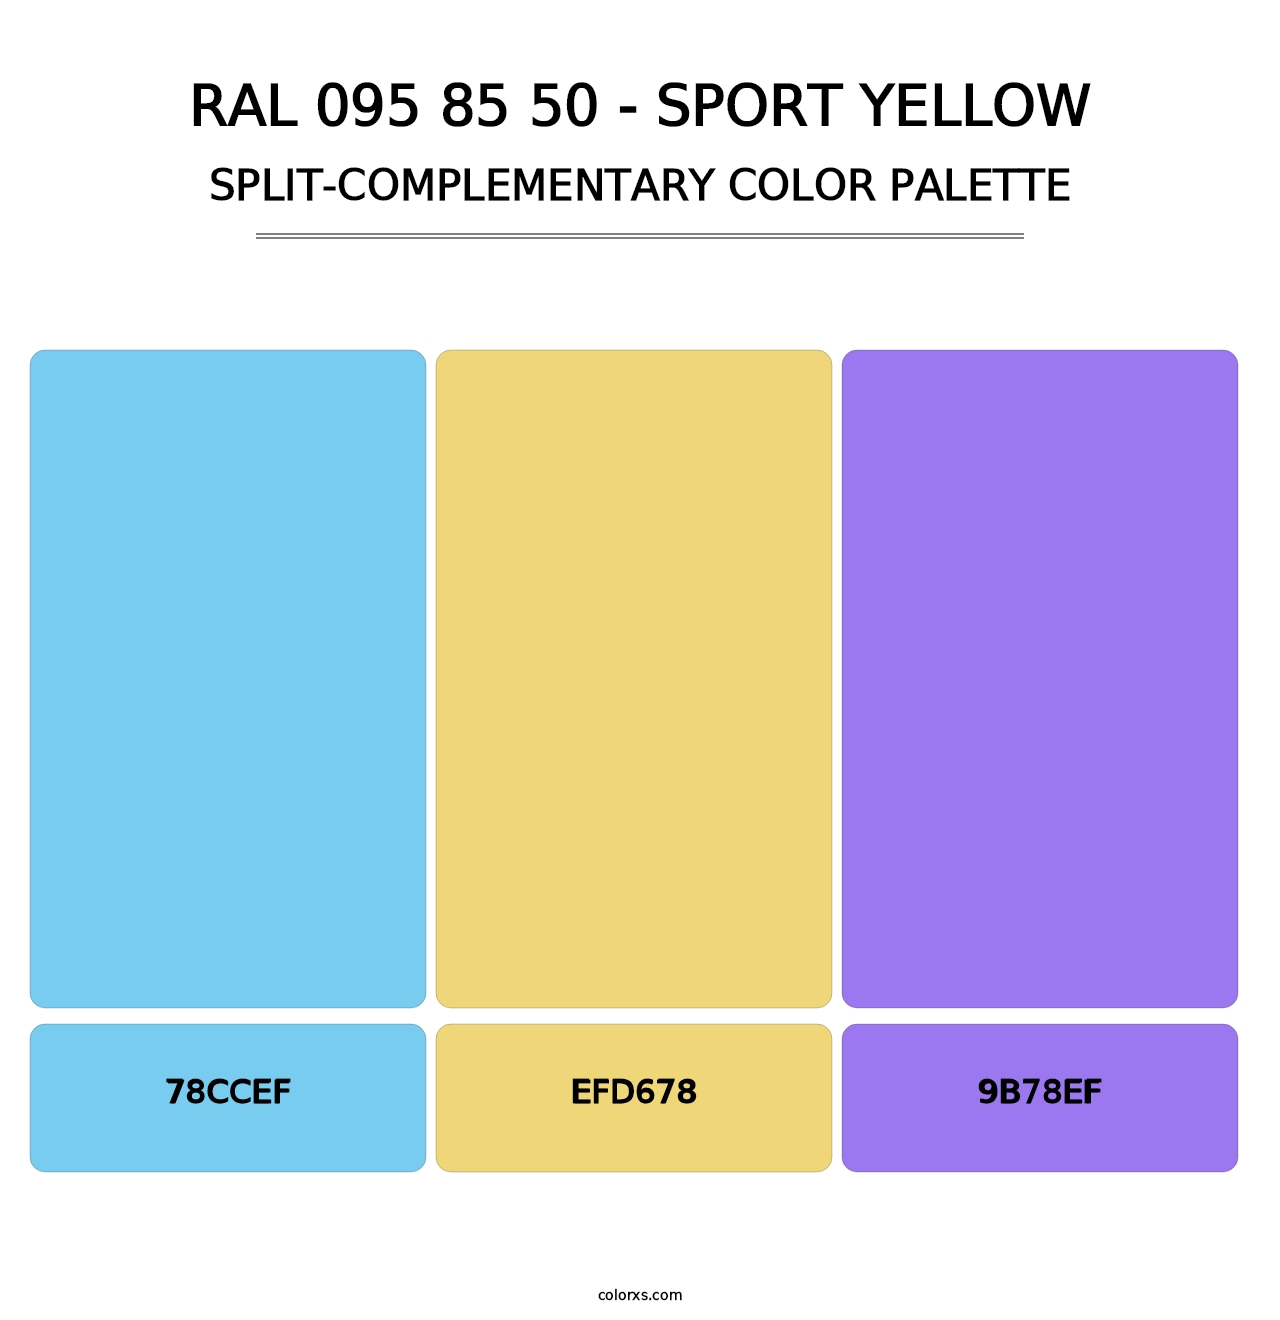 RAL 095 85 50 - Sport Yellow - Split-Complementary Color Palette